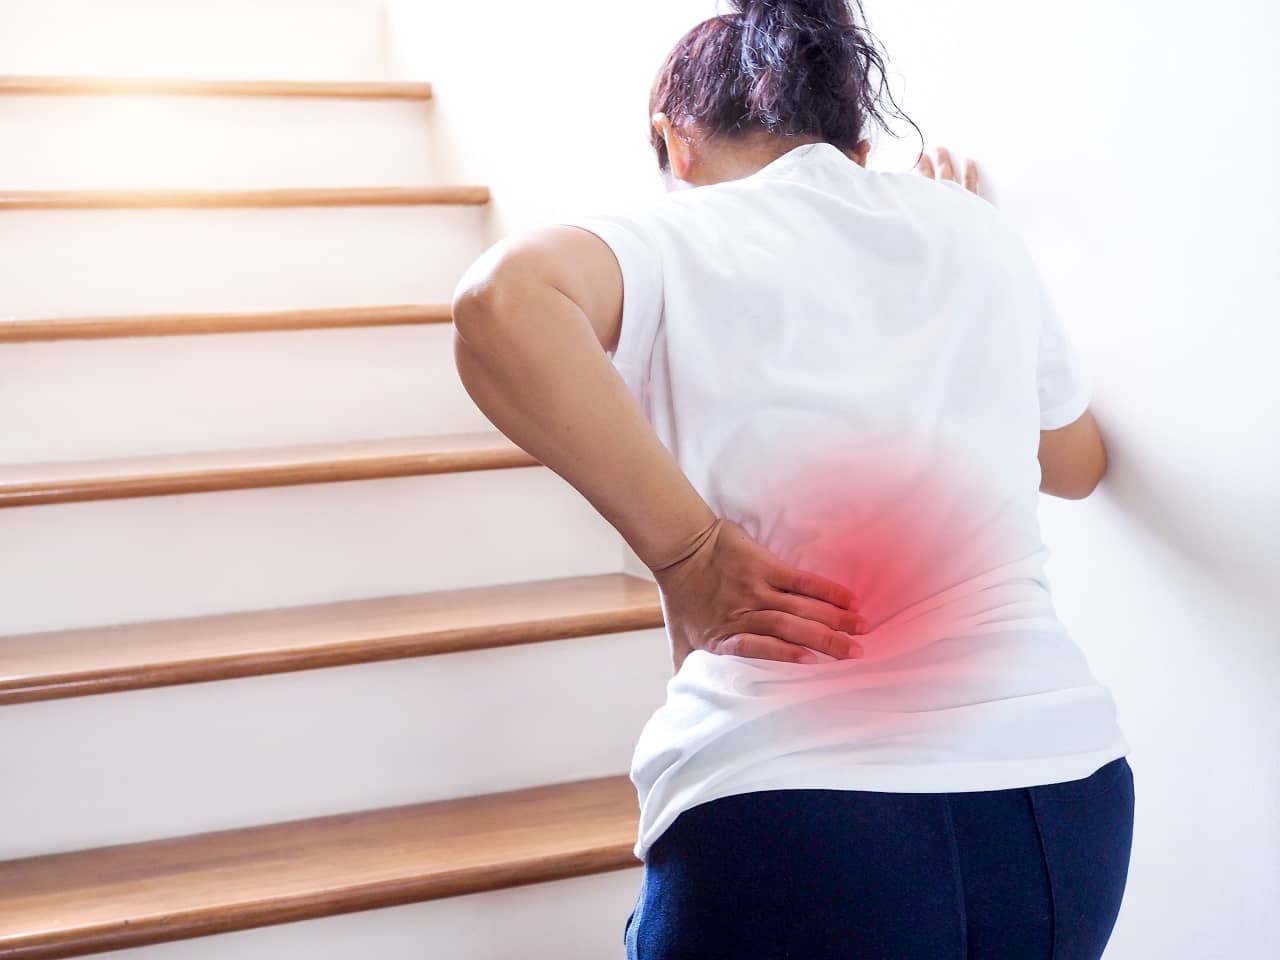 8 ways to relieve back pain naturally